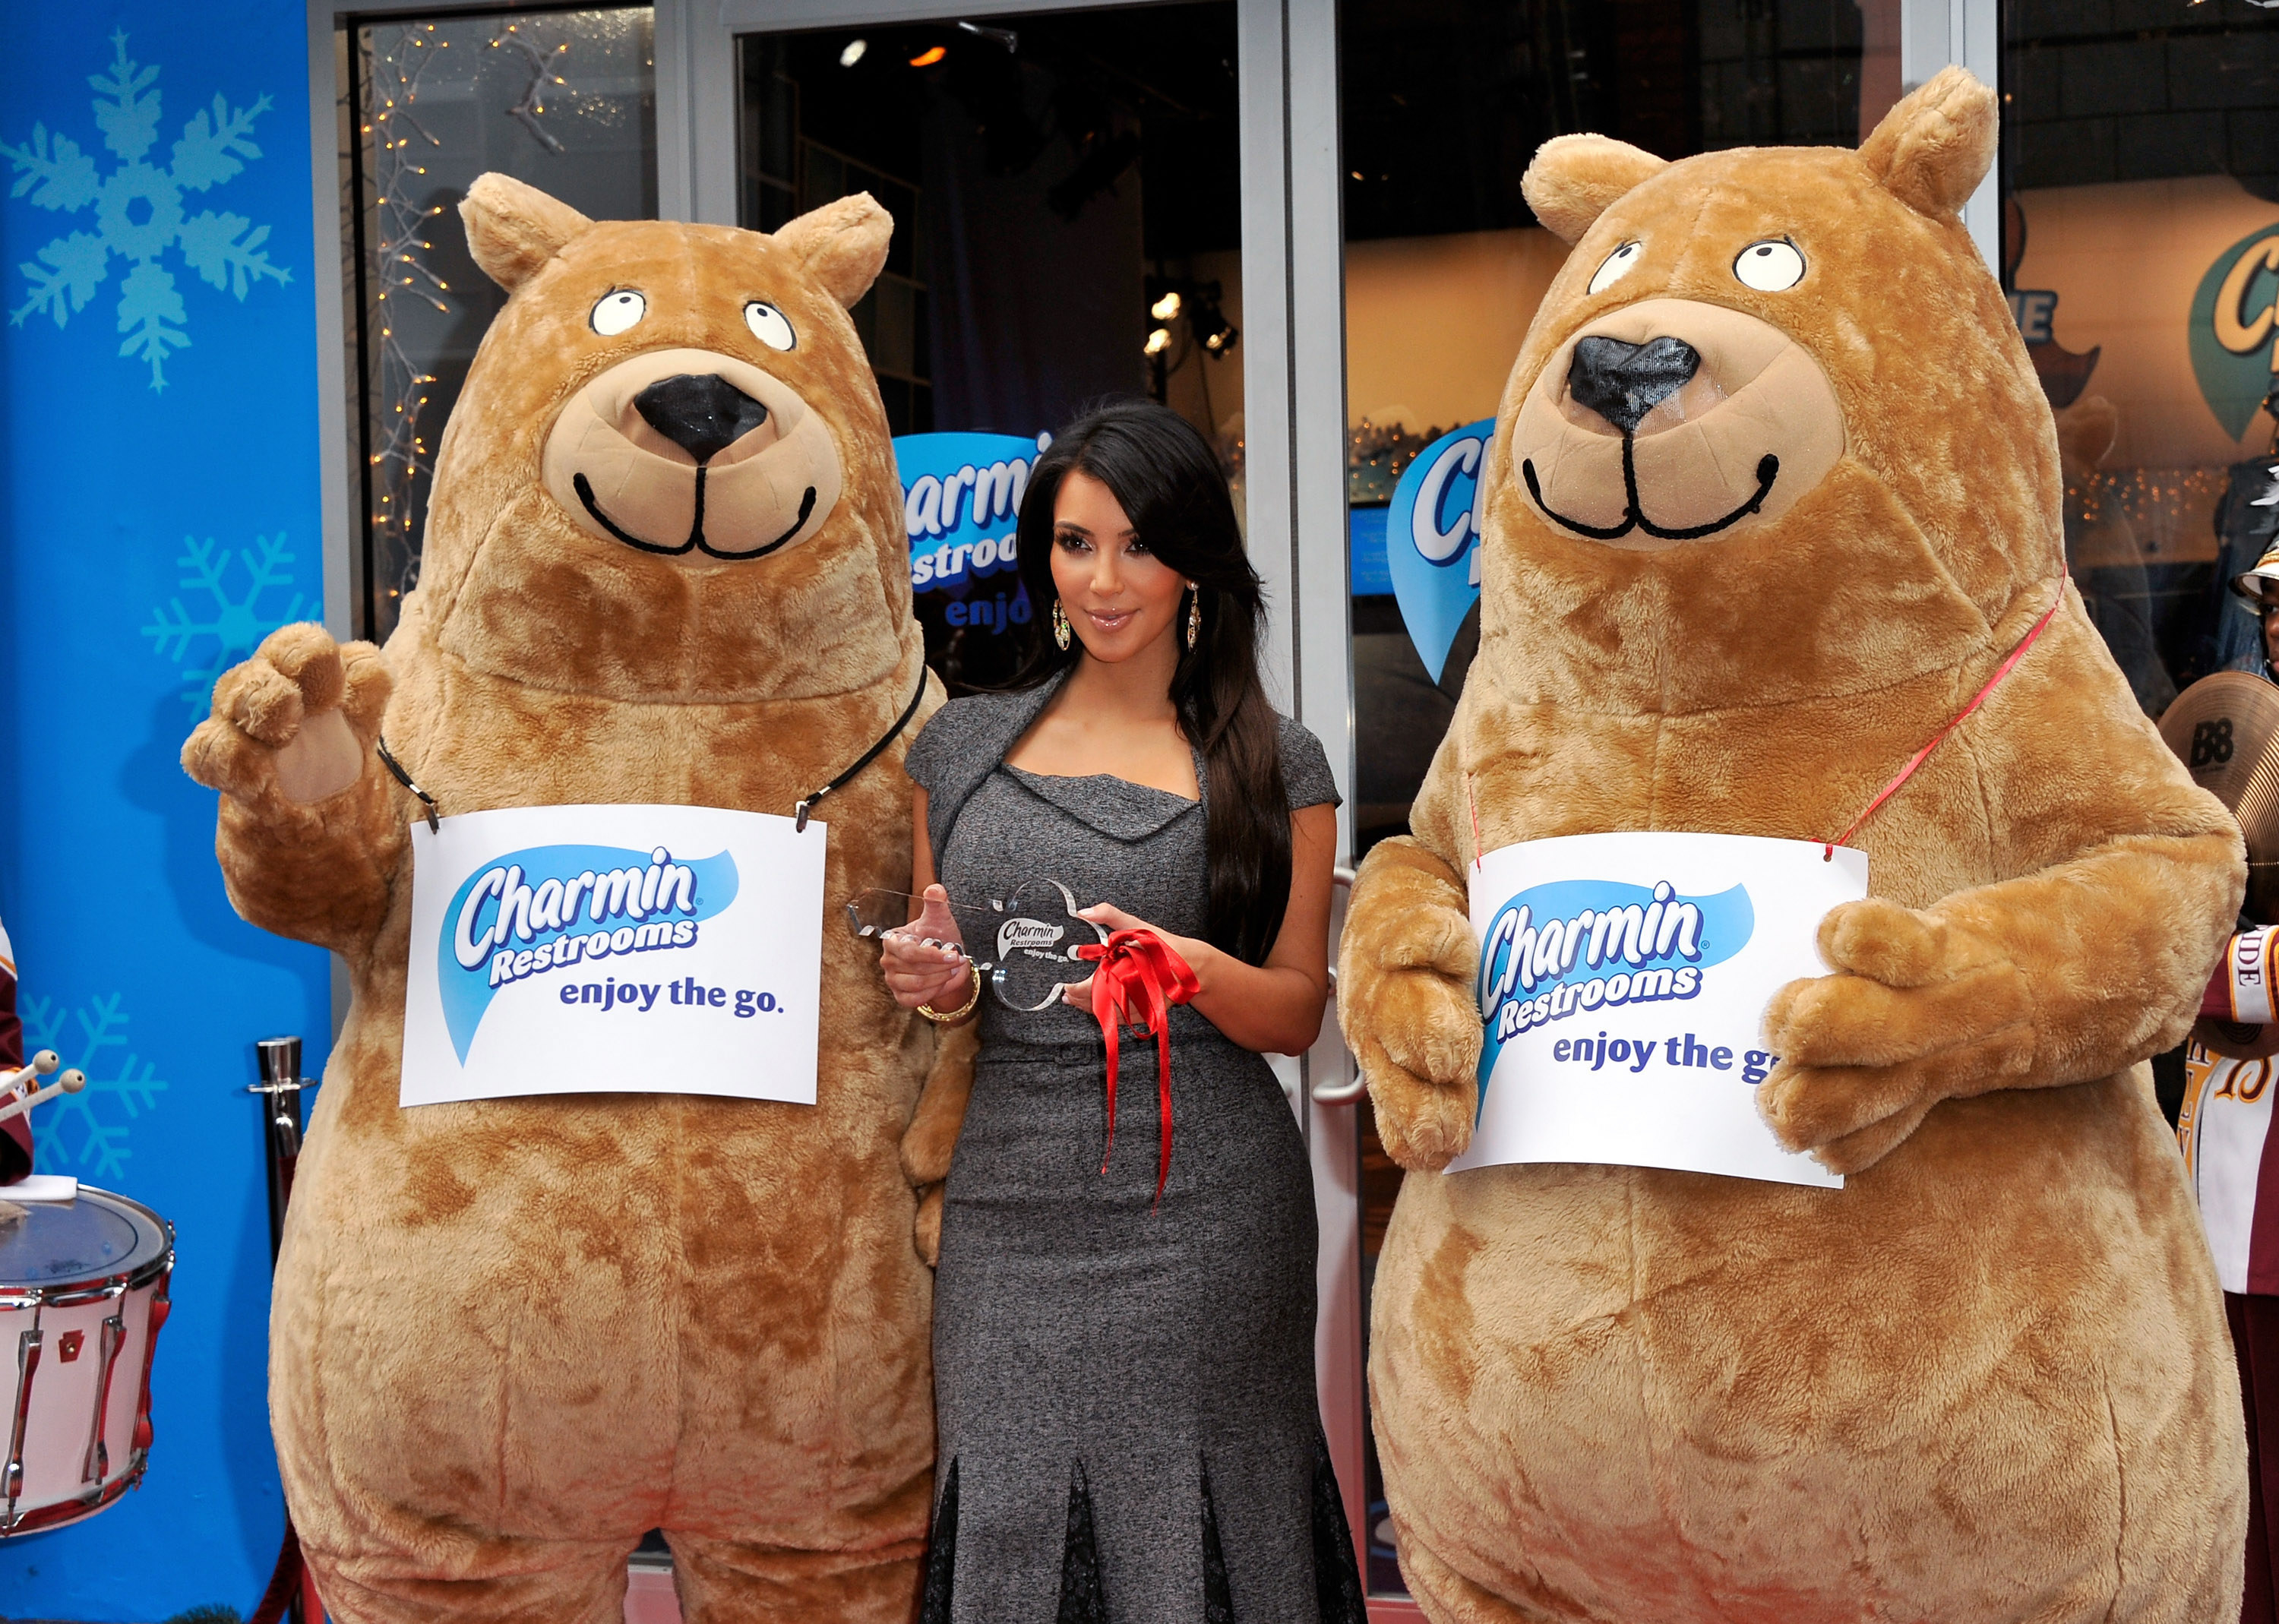 Kim stands between two large plush Charmin bears